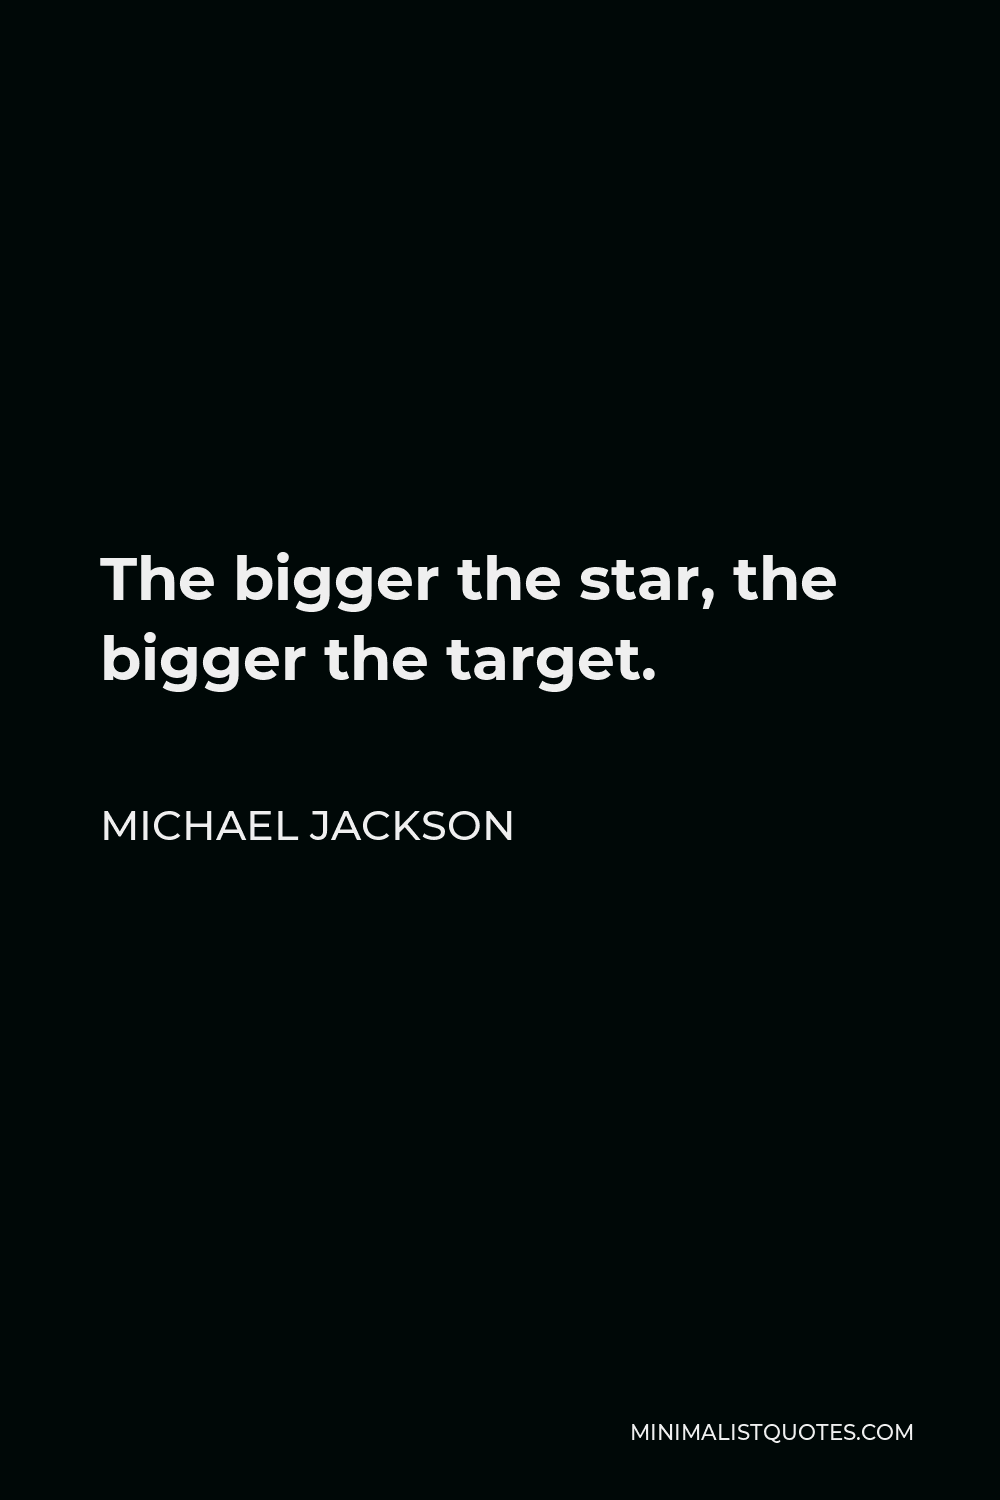 Michael Jackson Quote - The bigger the star, the bigger the target.